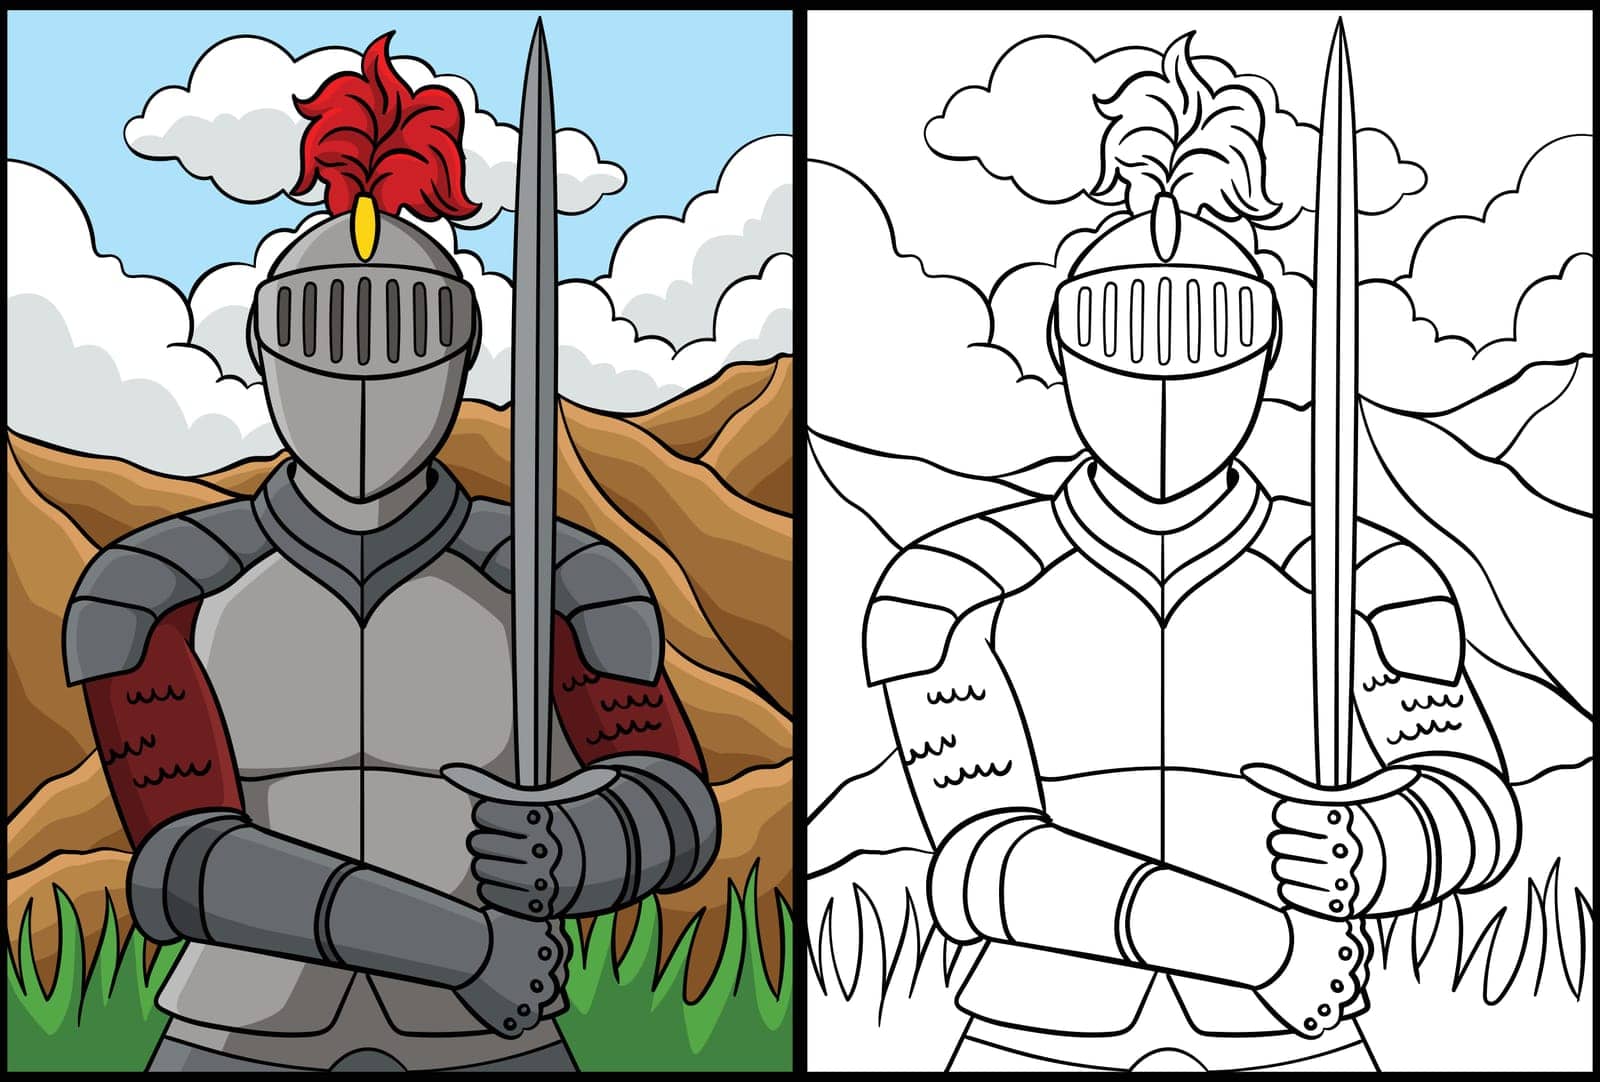 Knight in Armor Coloring Page Colored Illustration by abbydesign